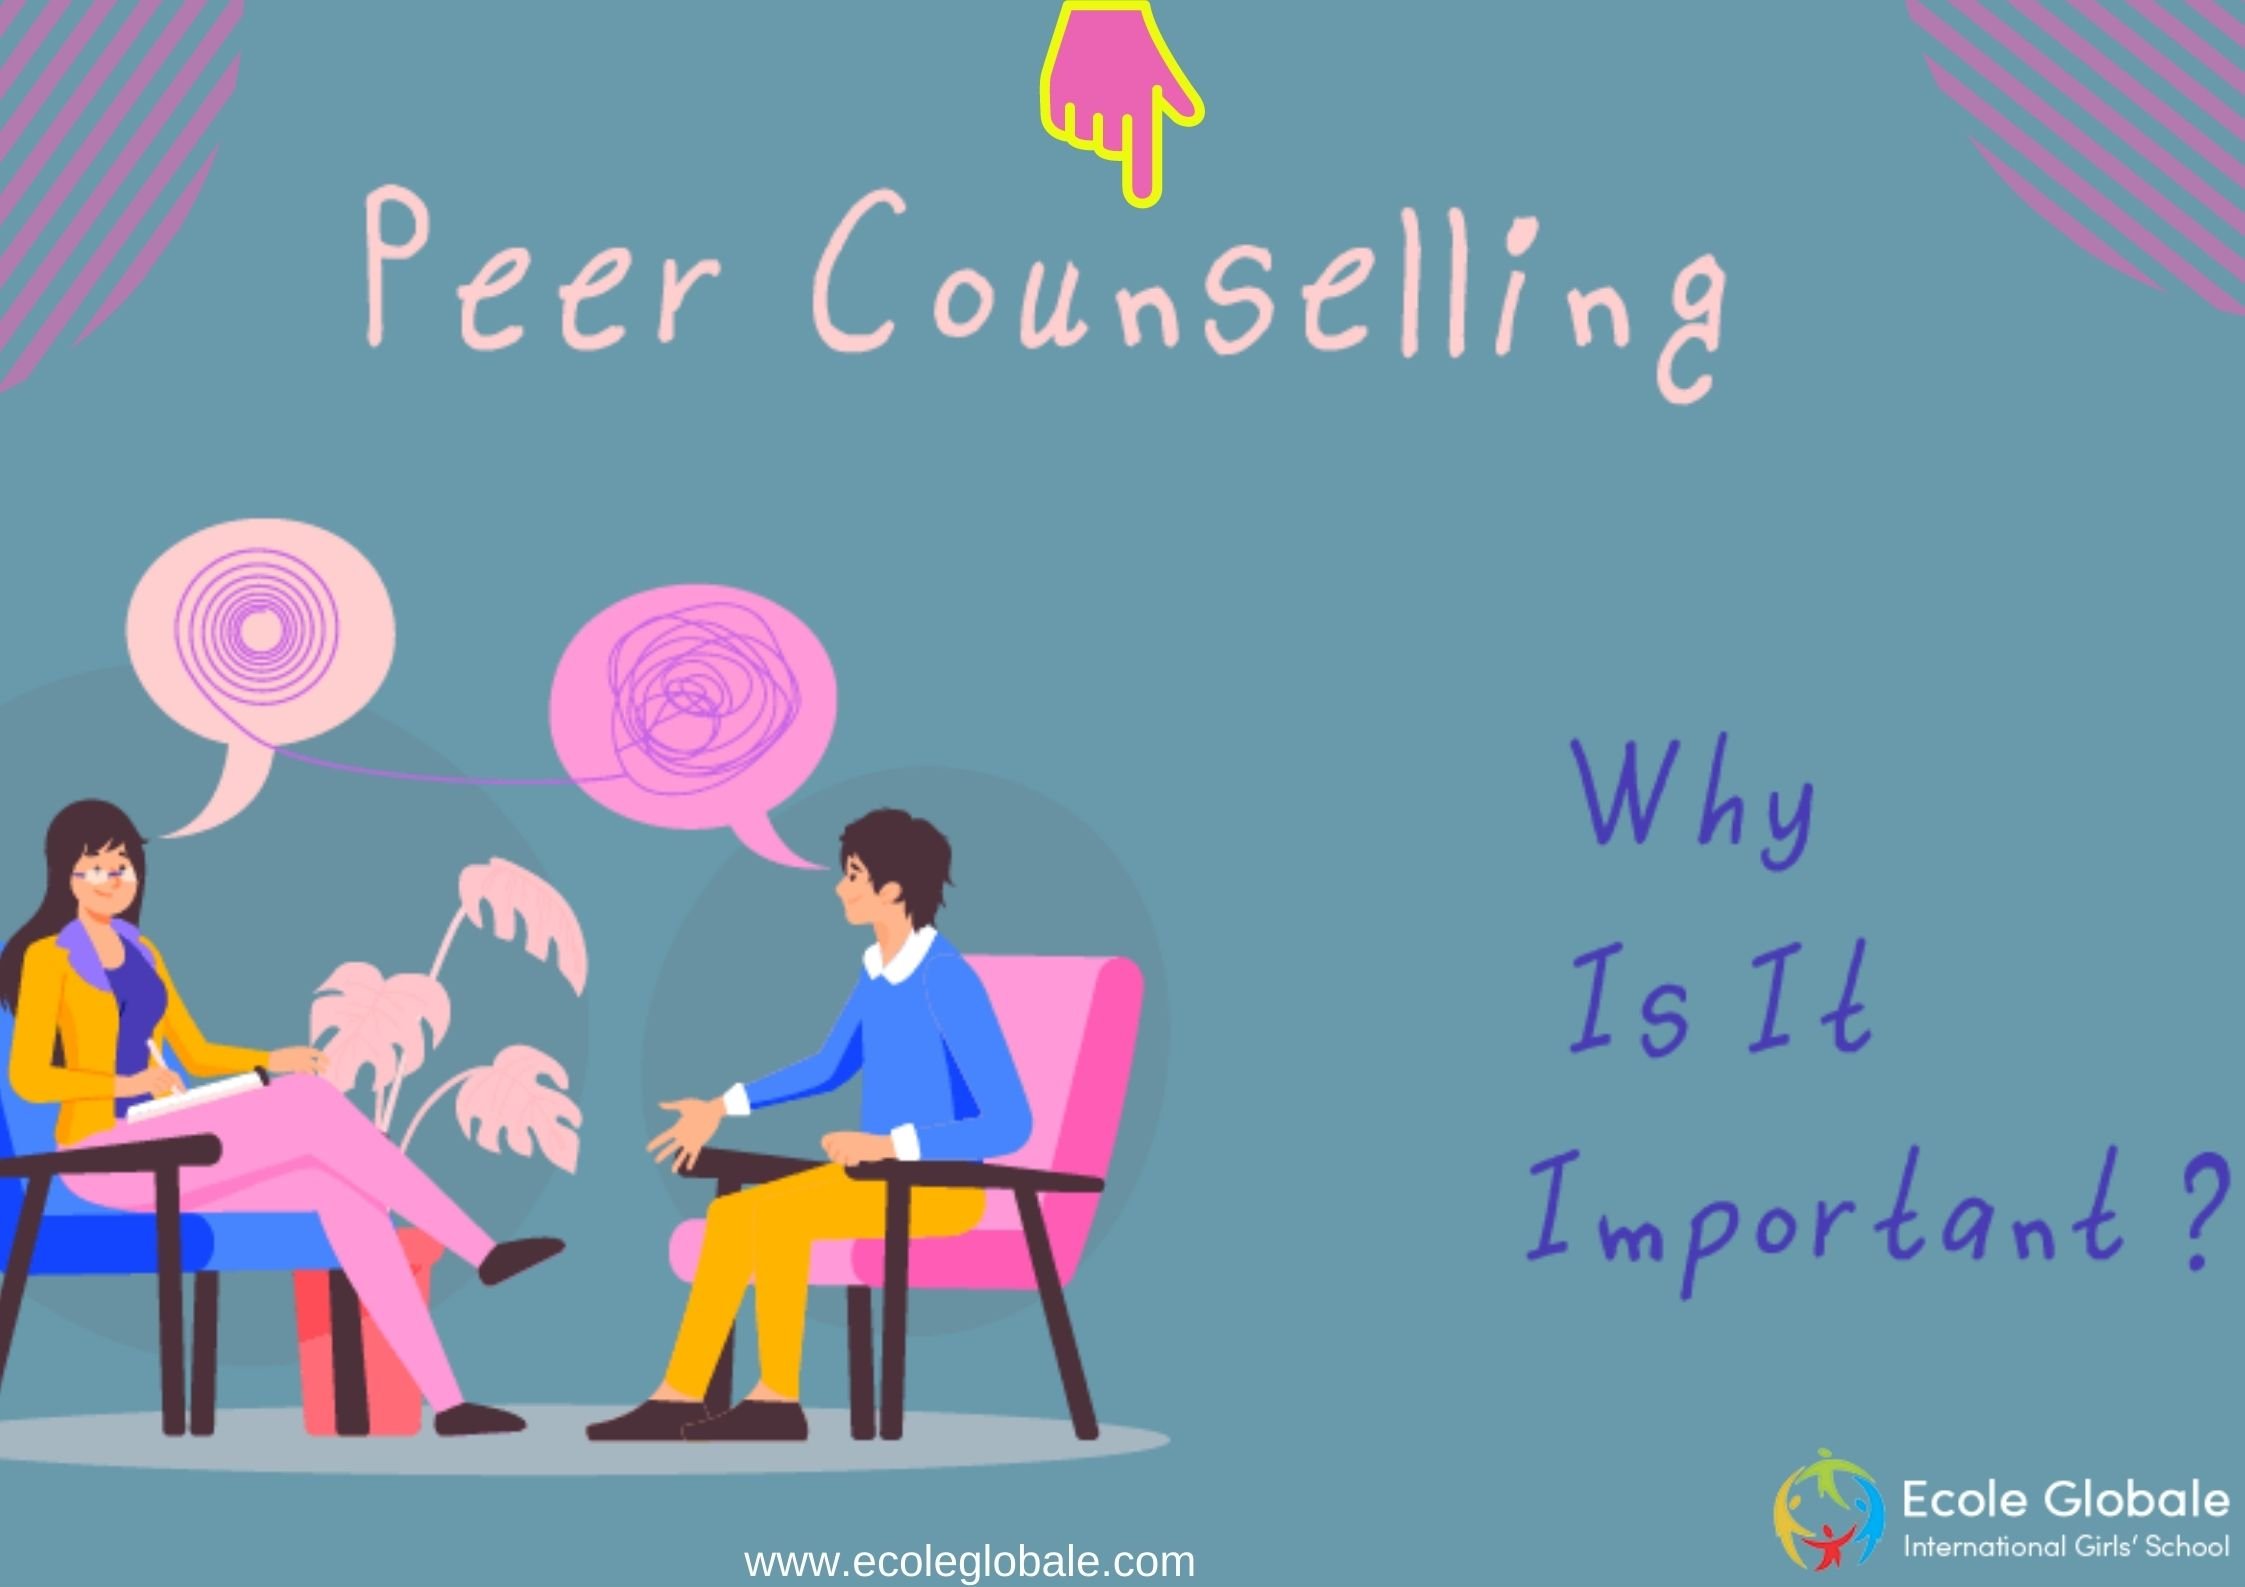 THE BENEFITS OF PEER-COUNSELING